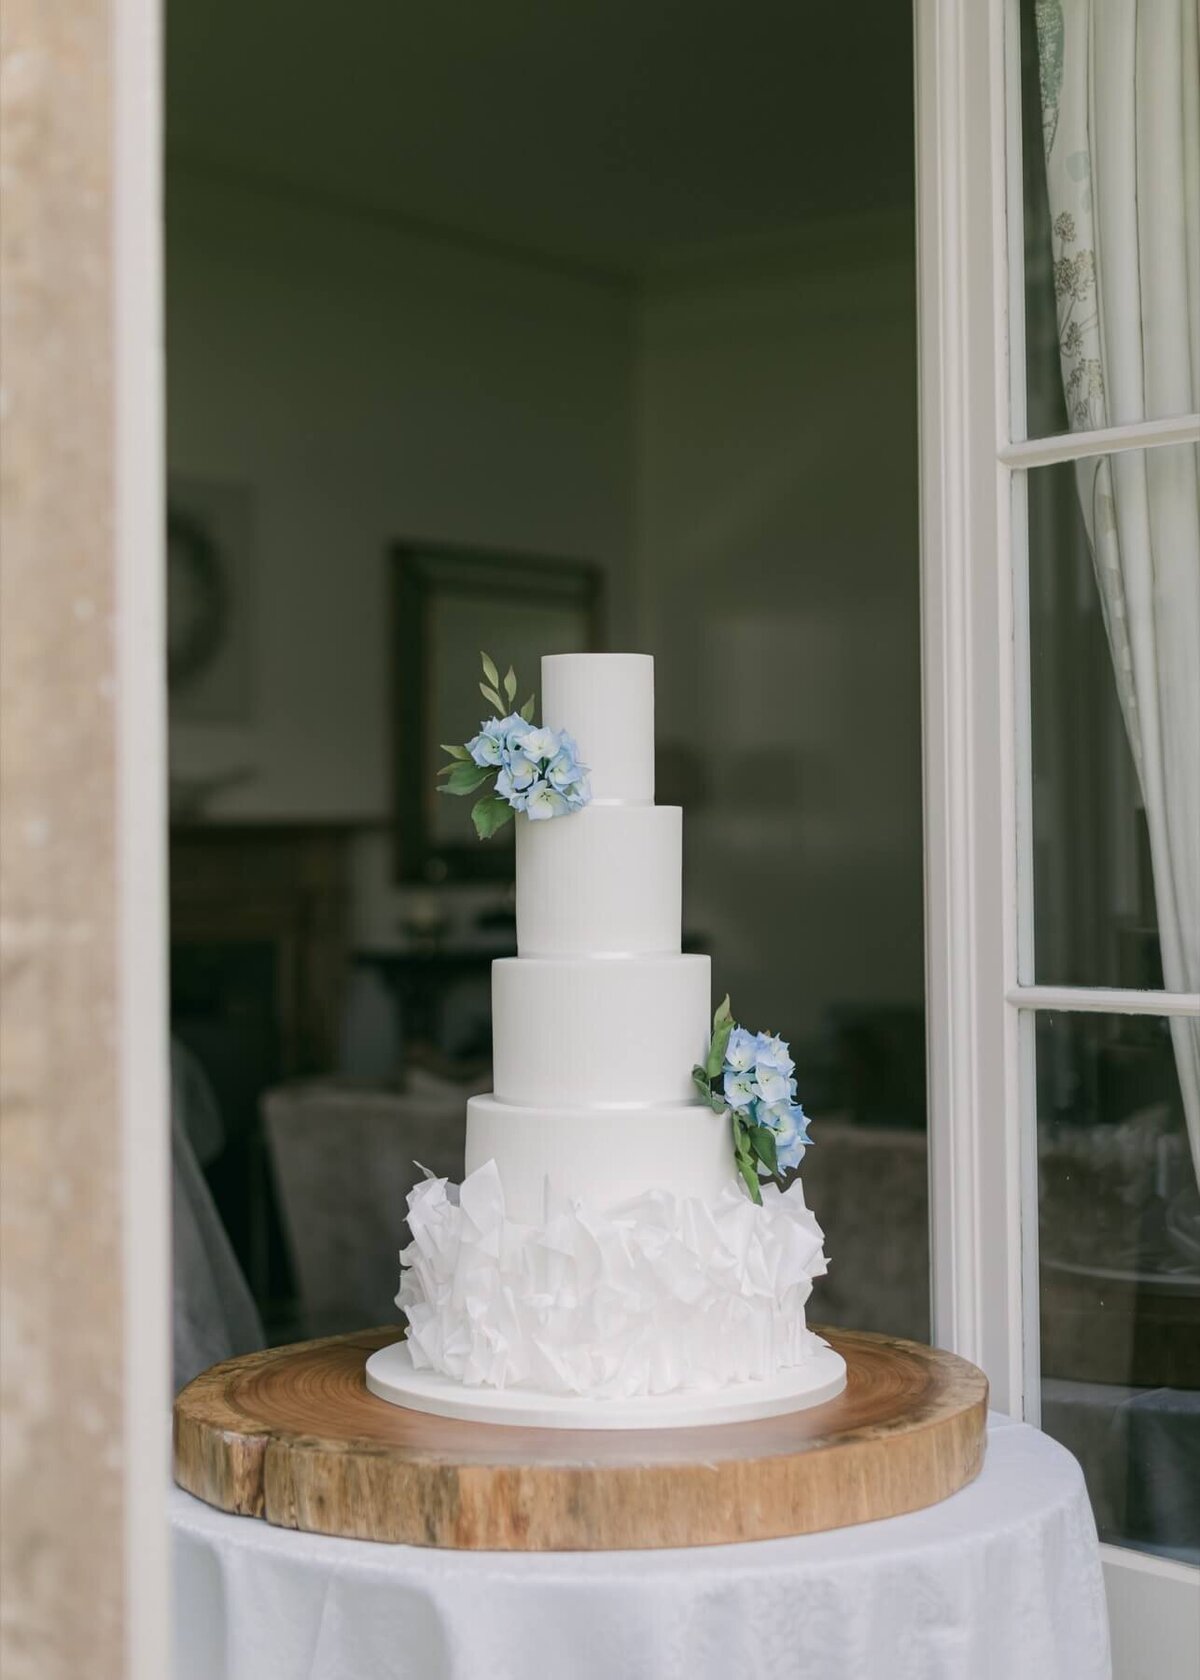 A wide shot of a white wedding cake showing ruffles at the bottom and blue hydrangea sugar flowers